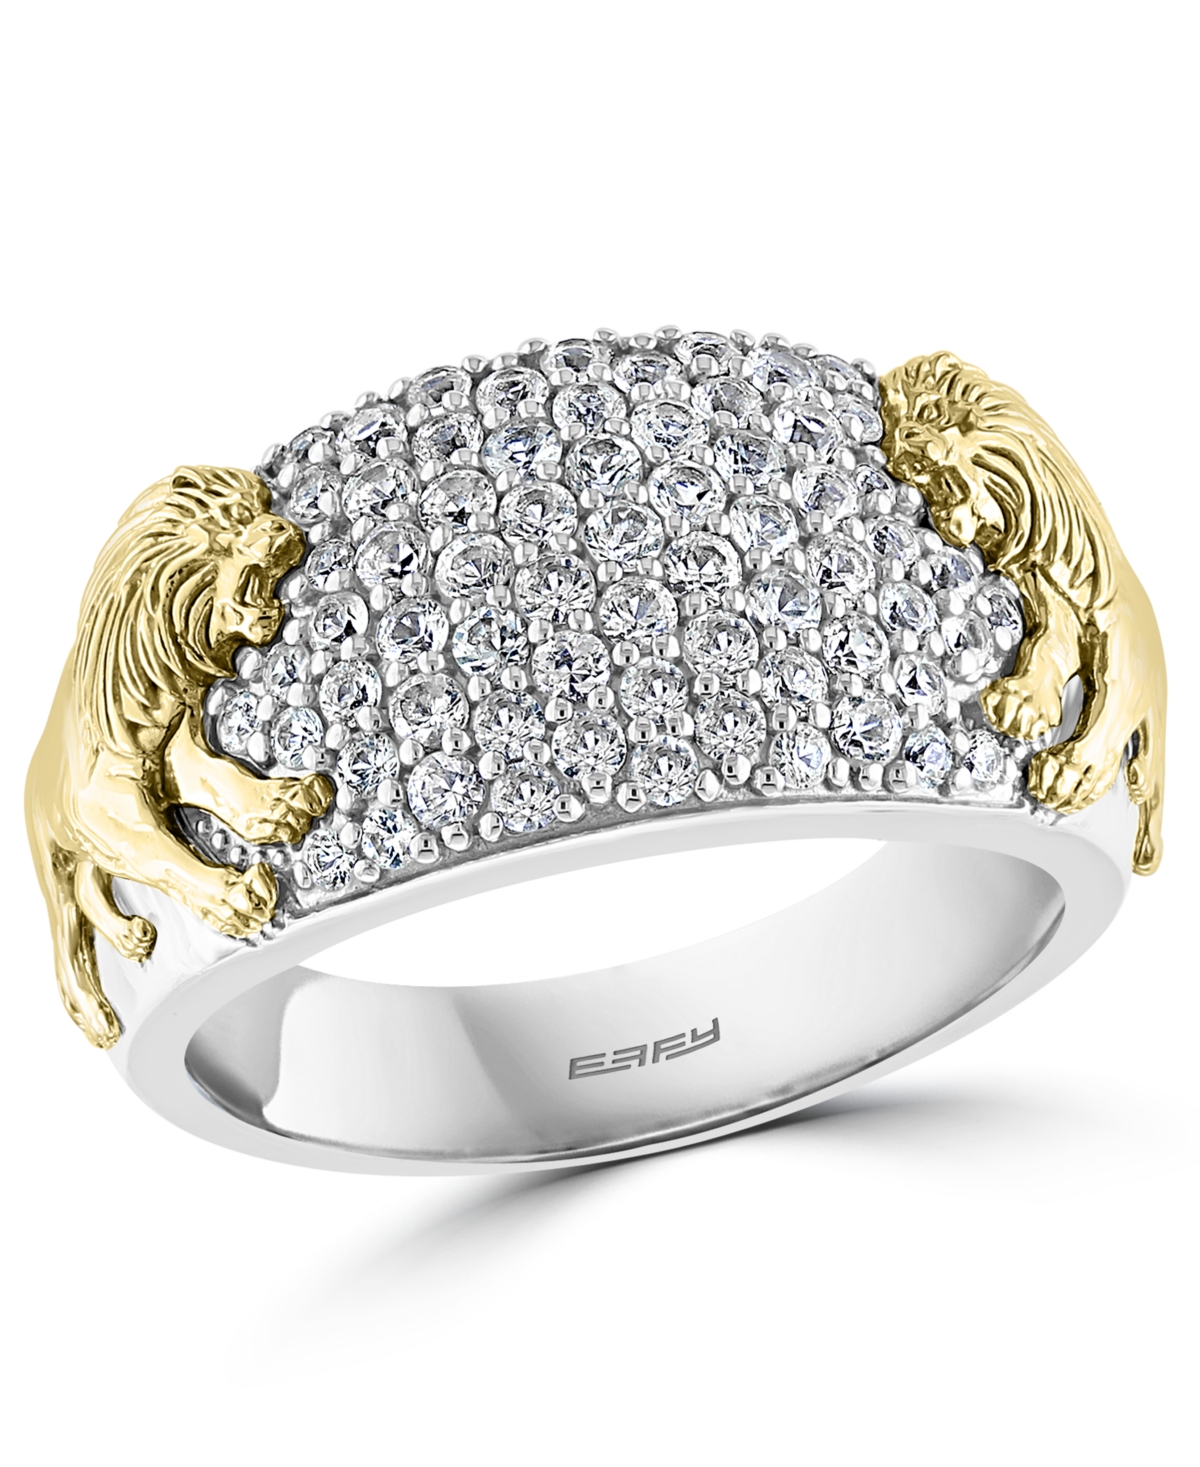 Effy Men's White Sapphire Lion Ring (1-3/8 ct. t.w.) in Sterling Silver & 14k Gold-Plate - Sterling Silver